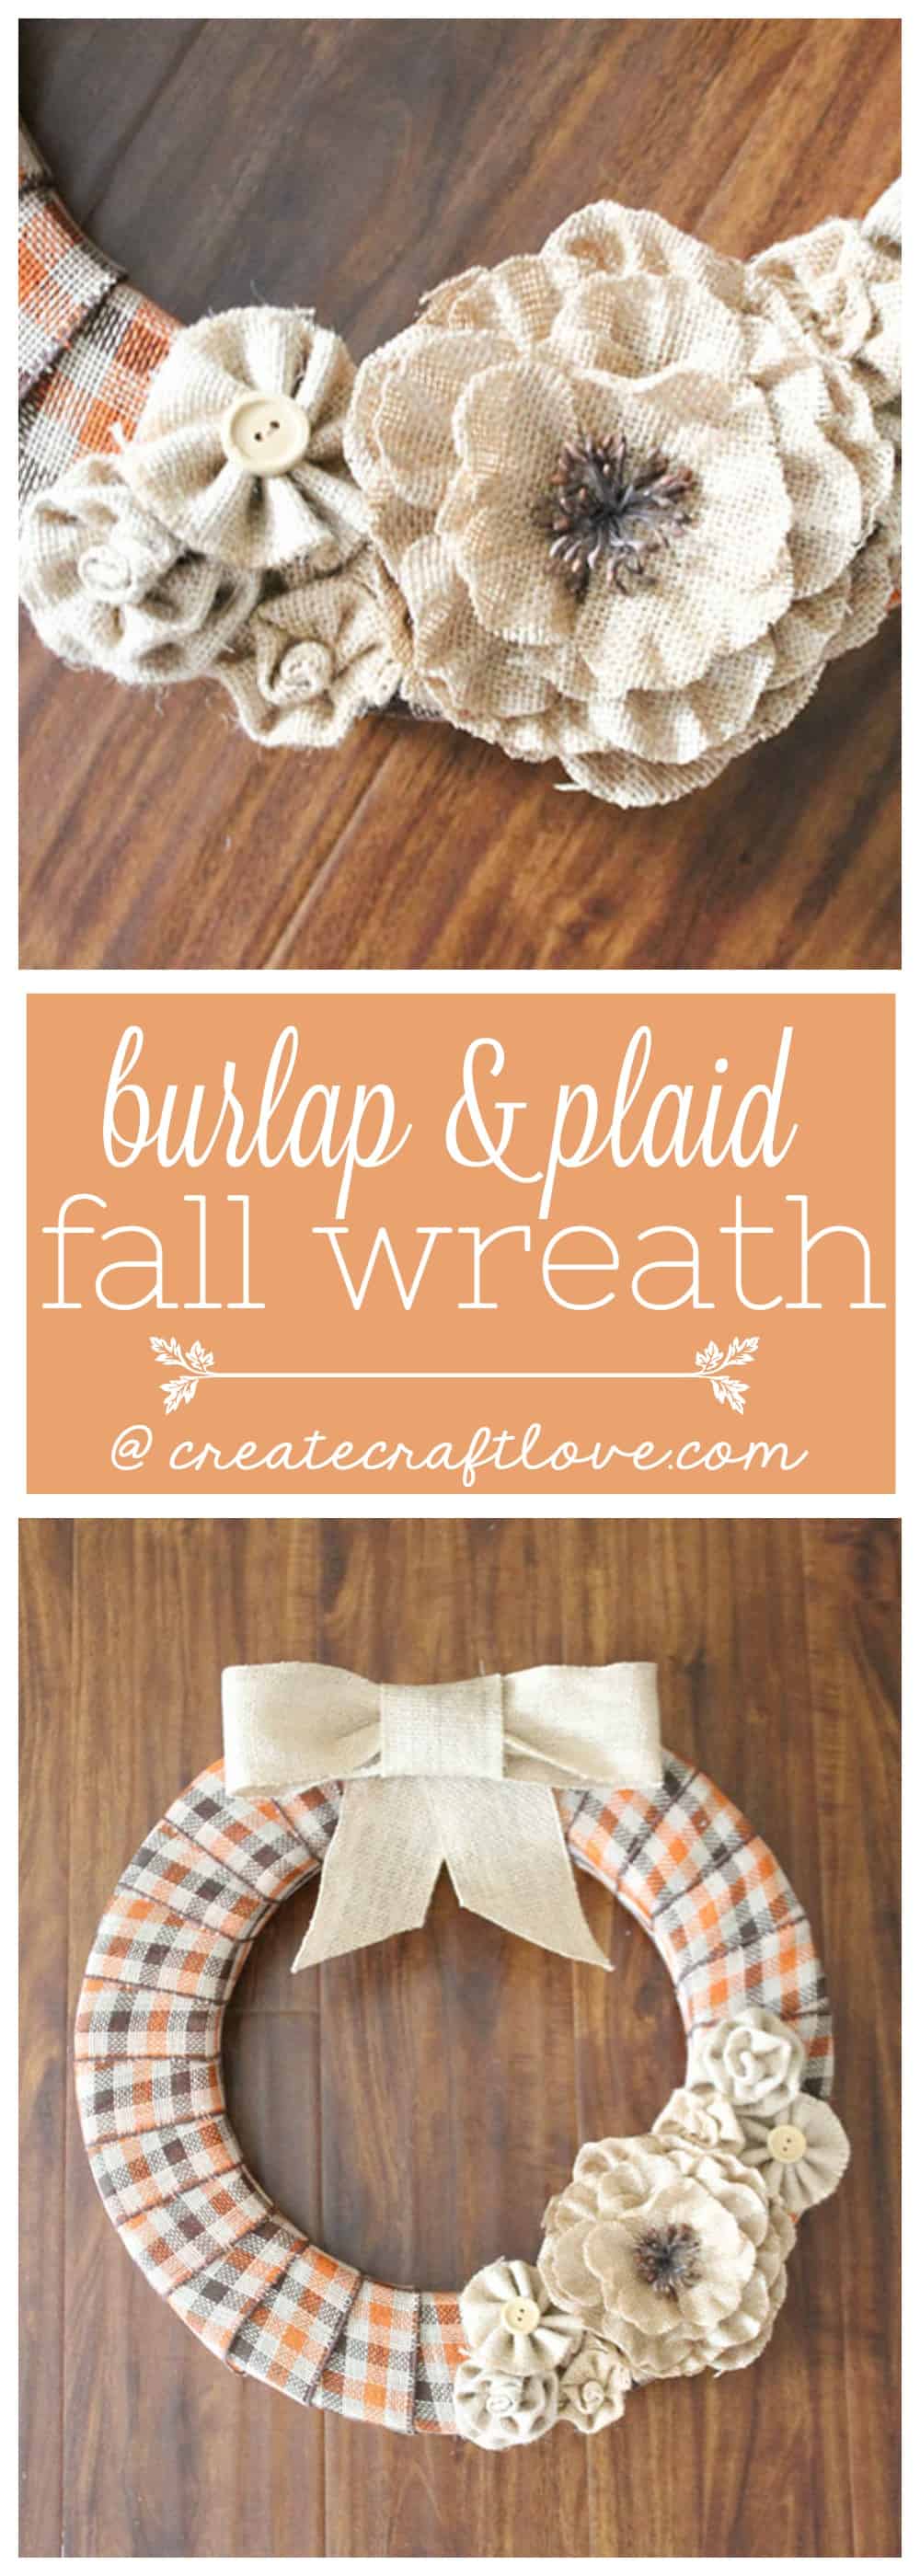 This Burlap and Plaid Fall Wreath is the perfect way to greet guests this autumn!